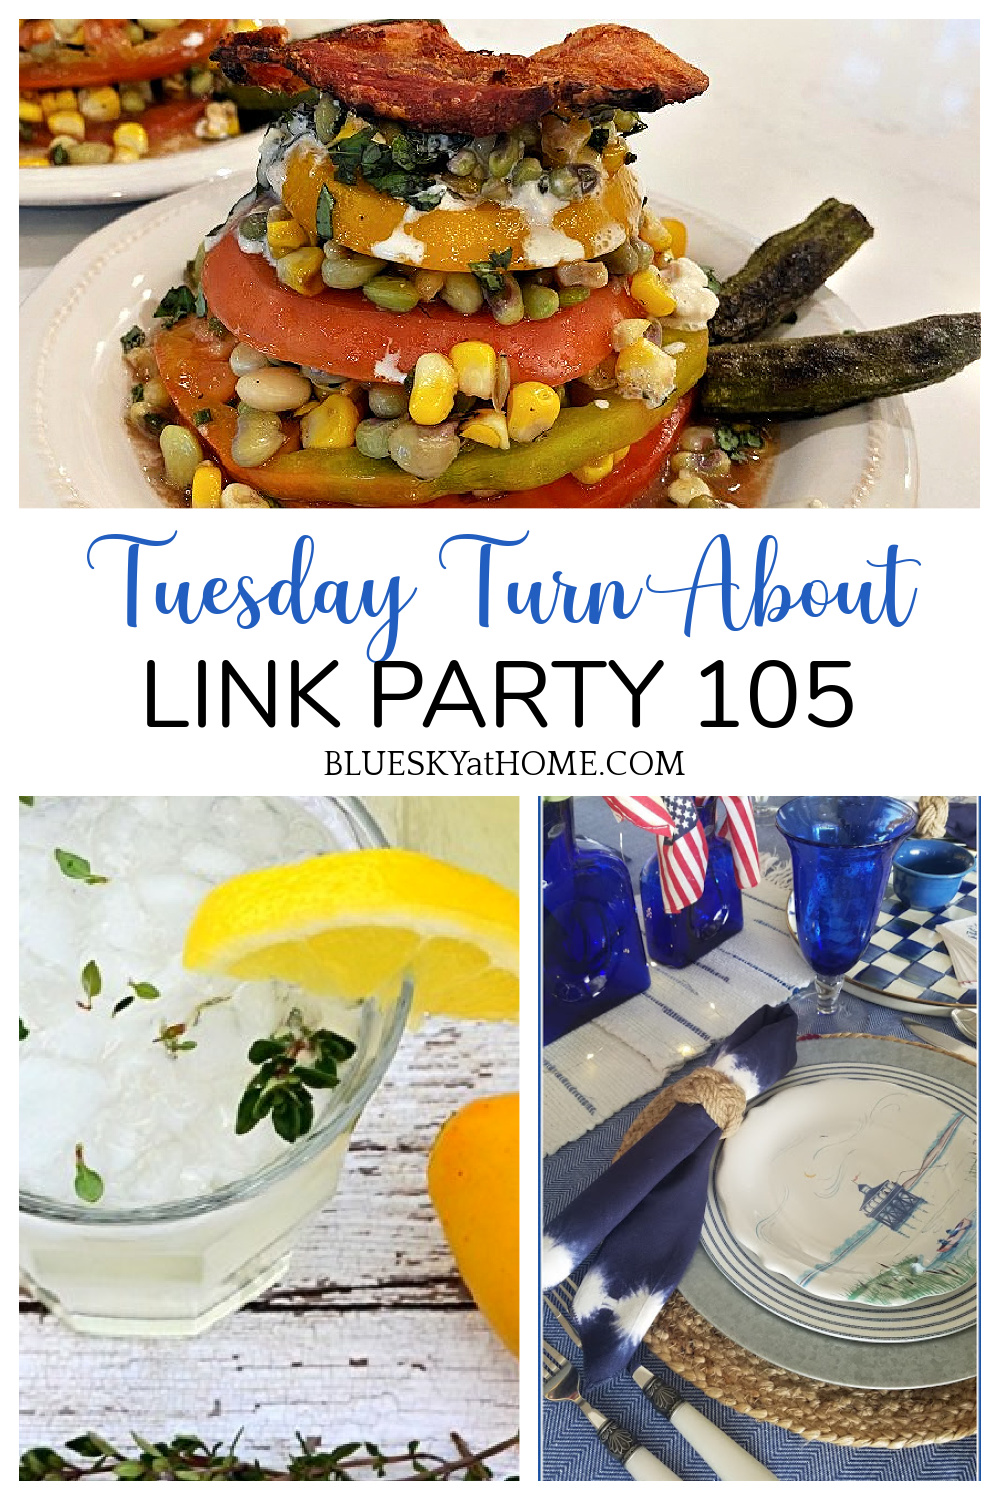 Tuesday Turn About Link Party 104